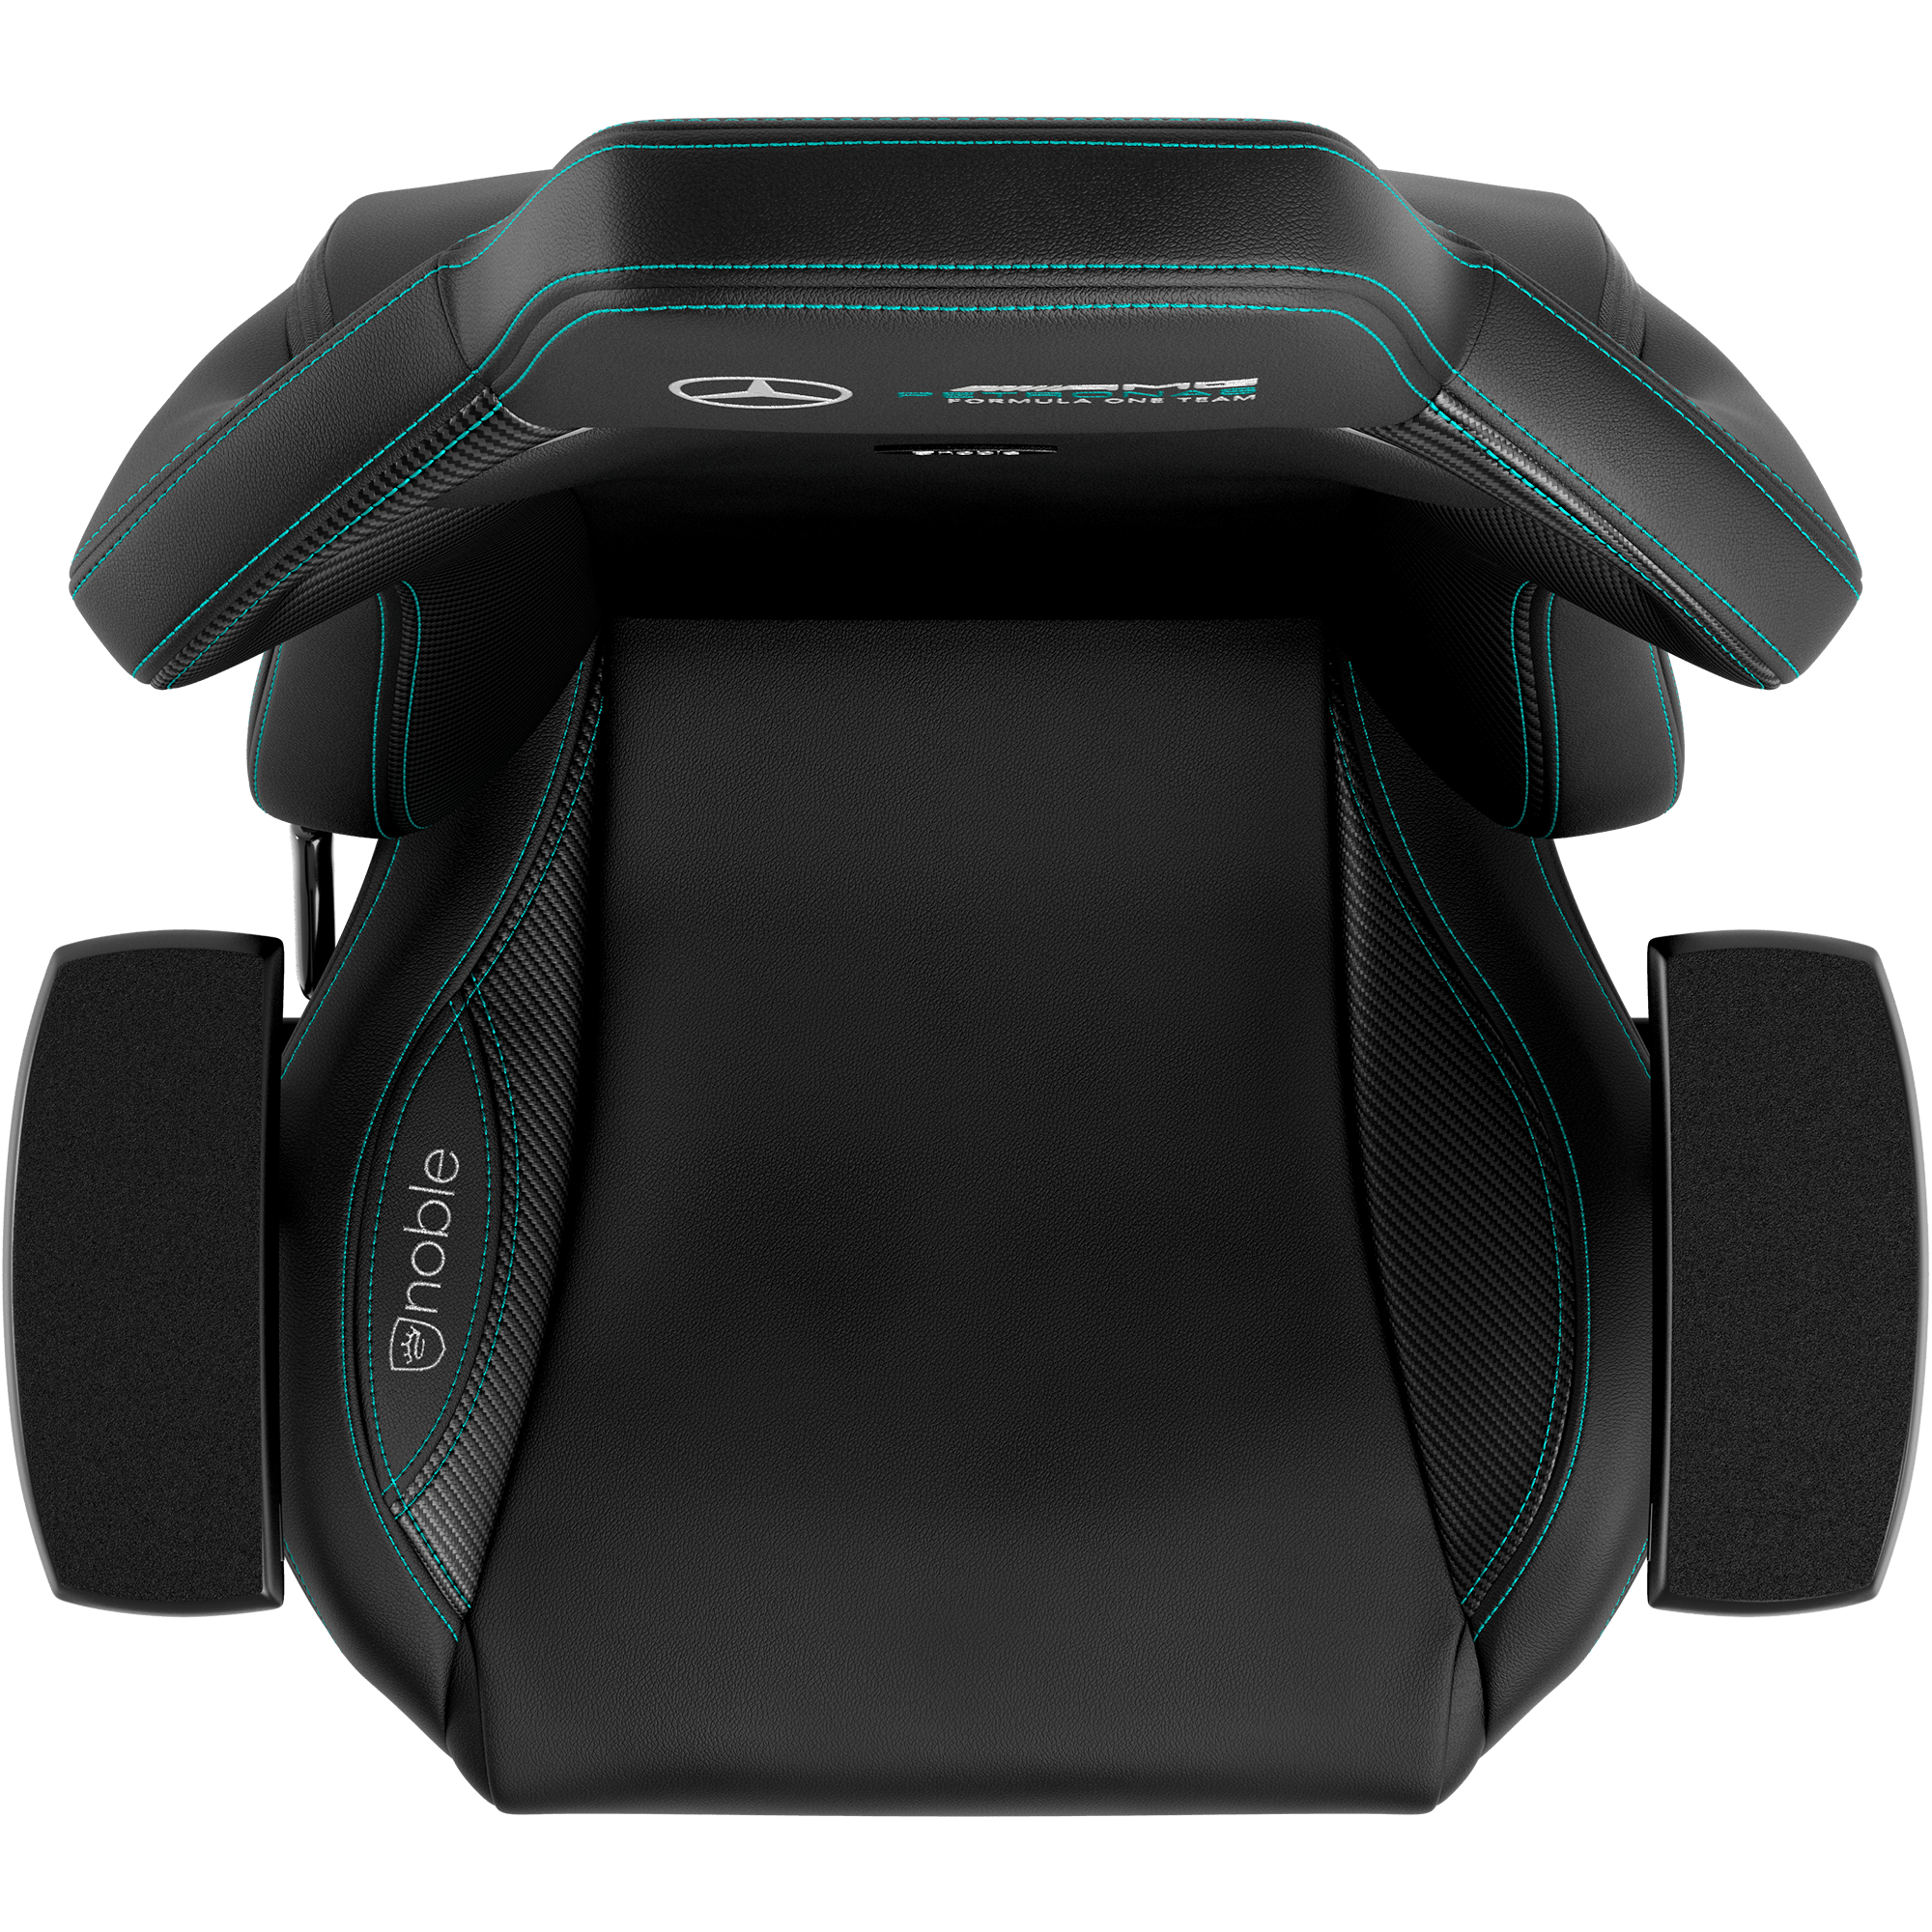 Gaming chair movable armrests AMG Mercedes F1 Petronas vegan pu leather